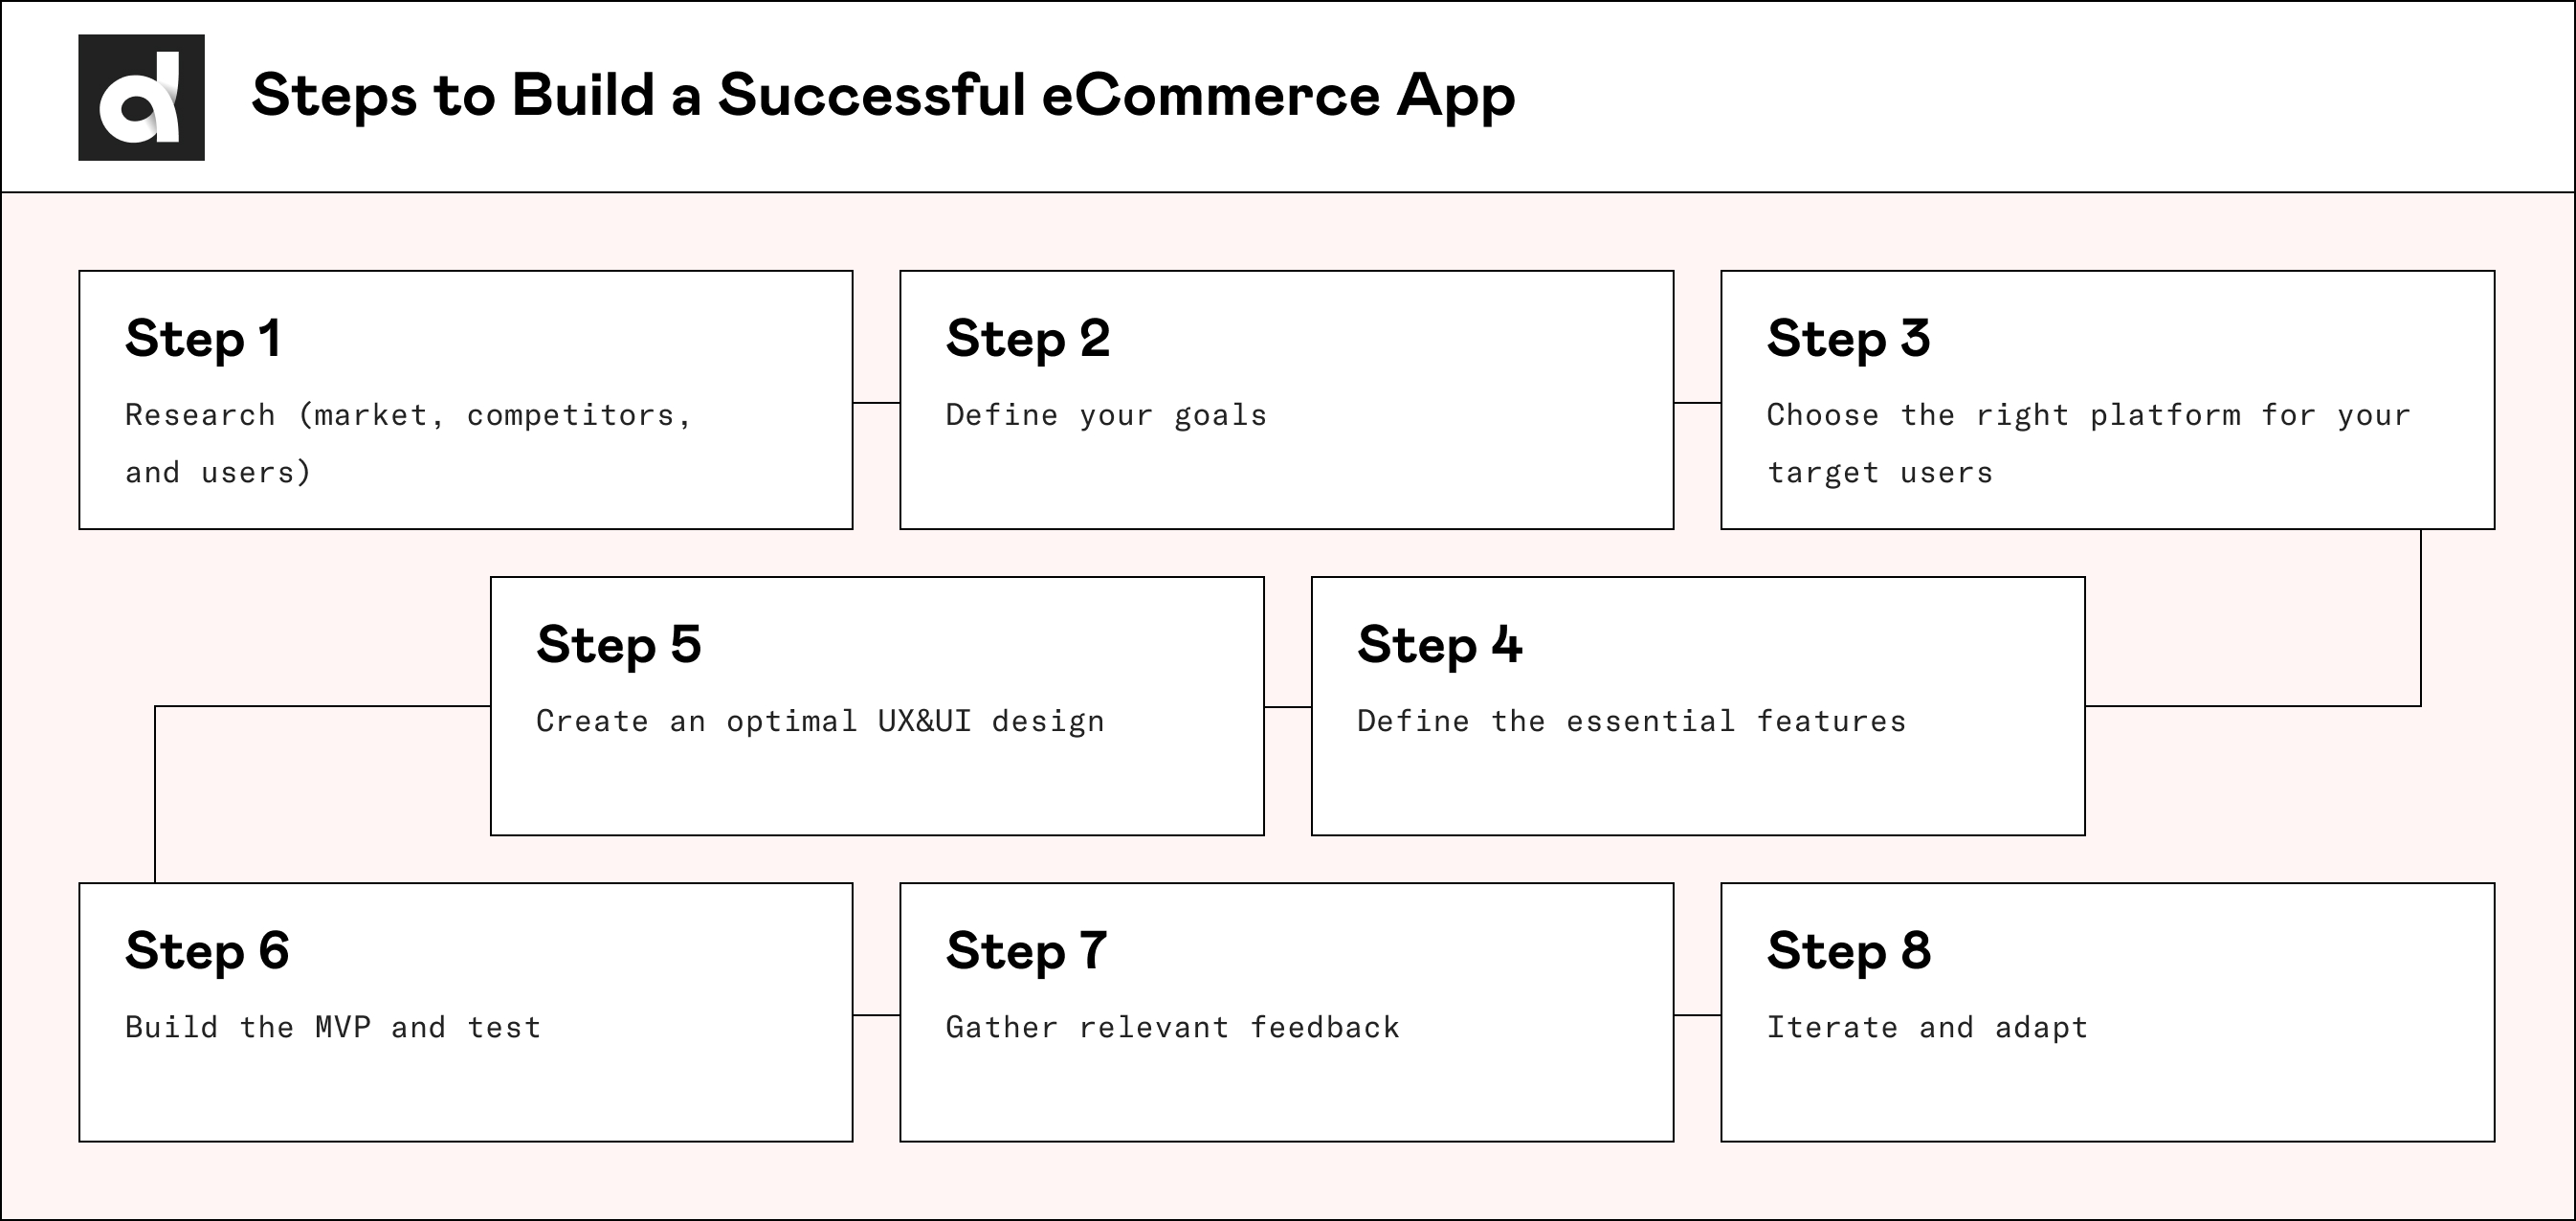 8 Steps To Building E-commerce App For the Chinese Market an infographic; simple step-by-step guide to building an ecommerce app for Chinese market